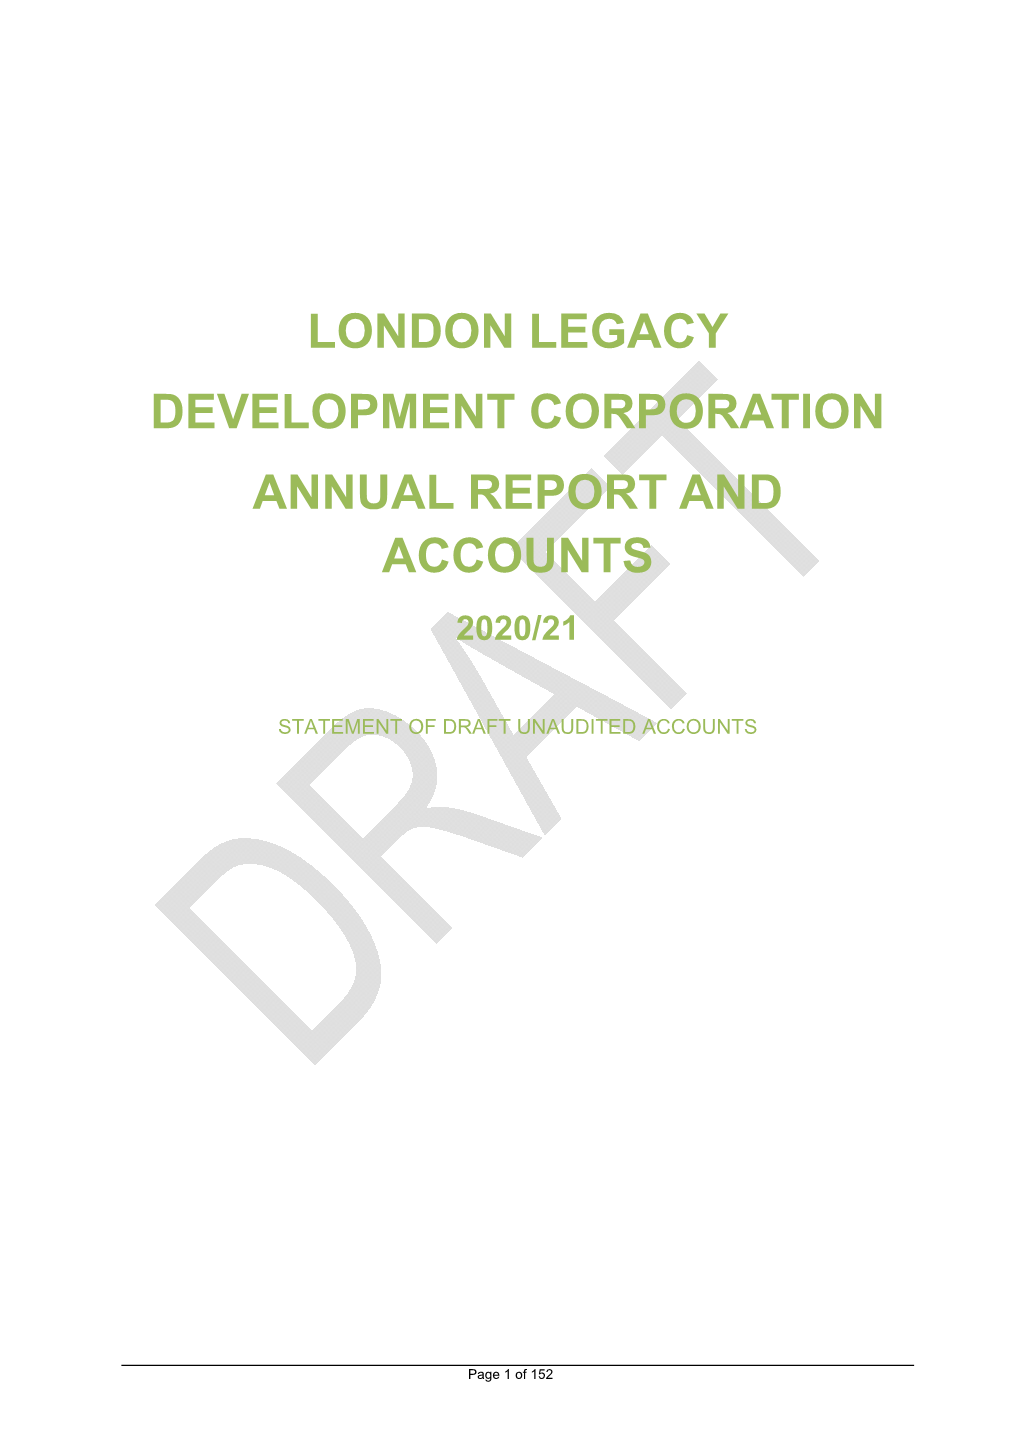 London Legacy Development Corporation Annual Report and Accounts 2020/21